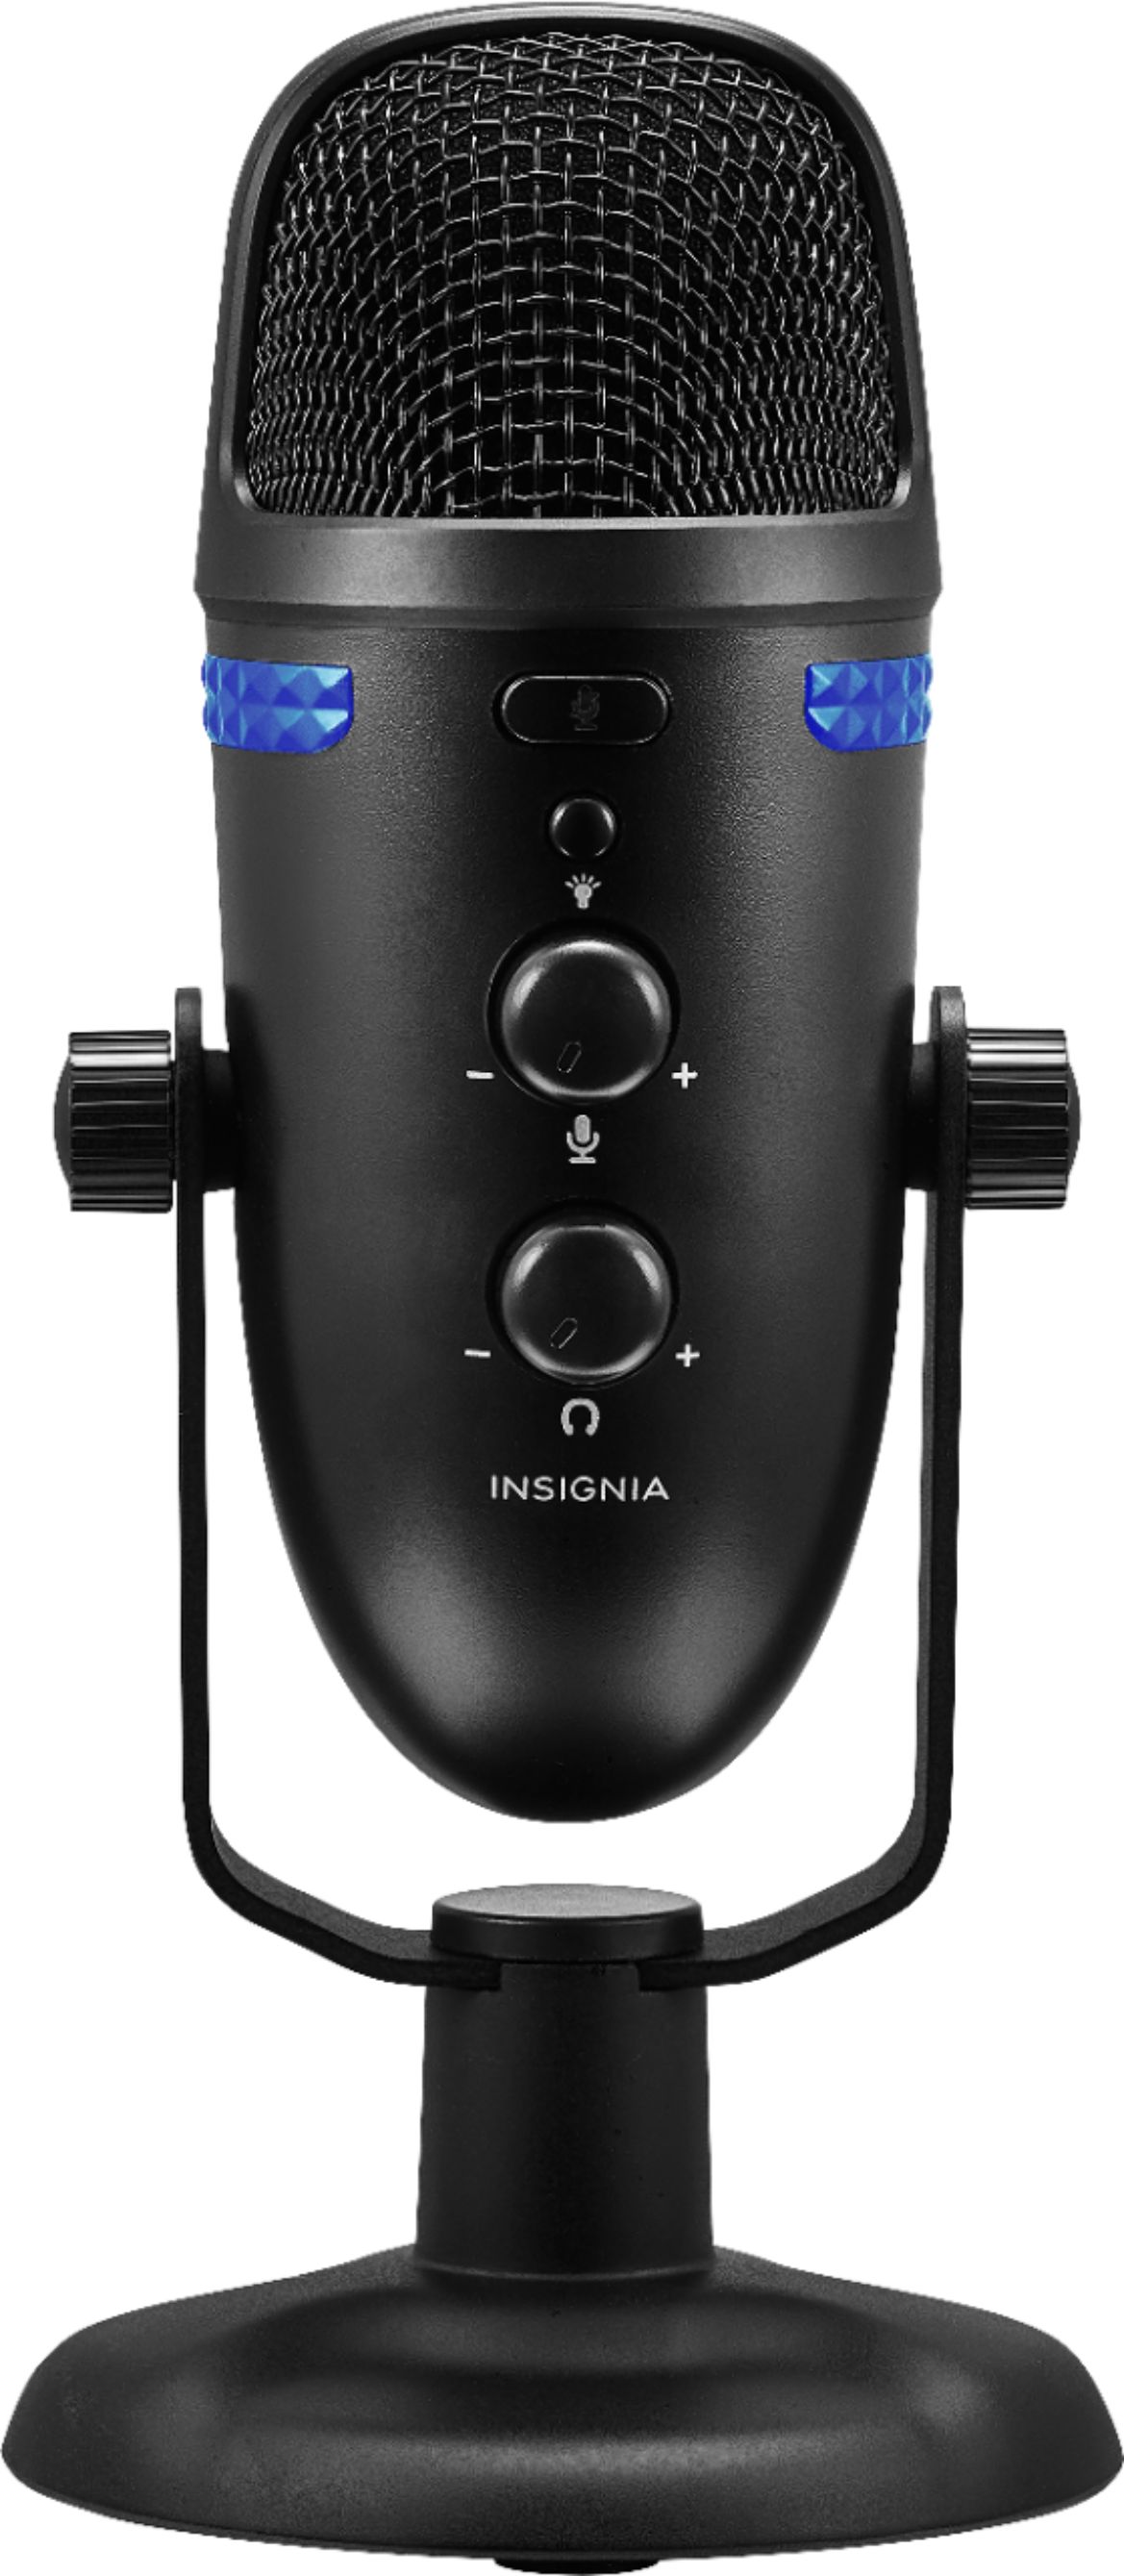 Insignia™ Wired Cardioid & Omnidirectional USB Microphone NS